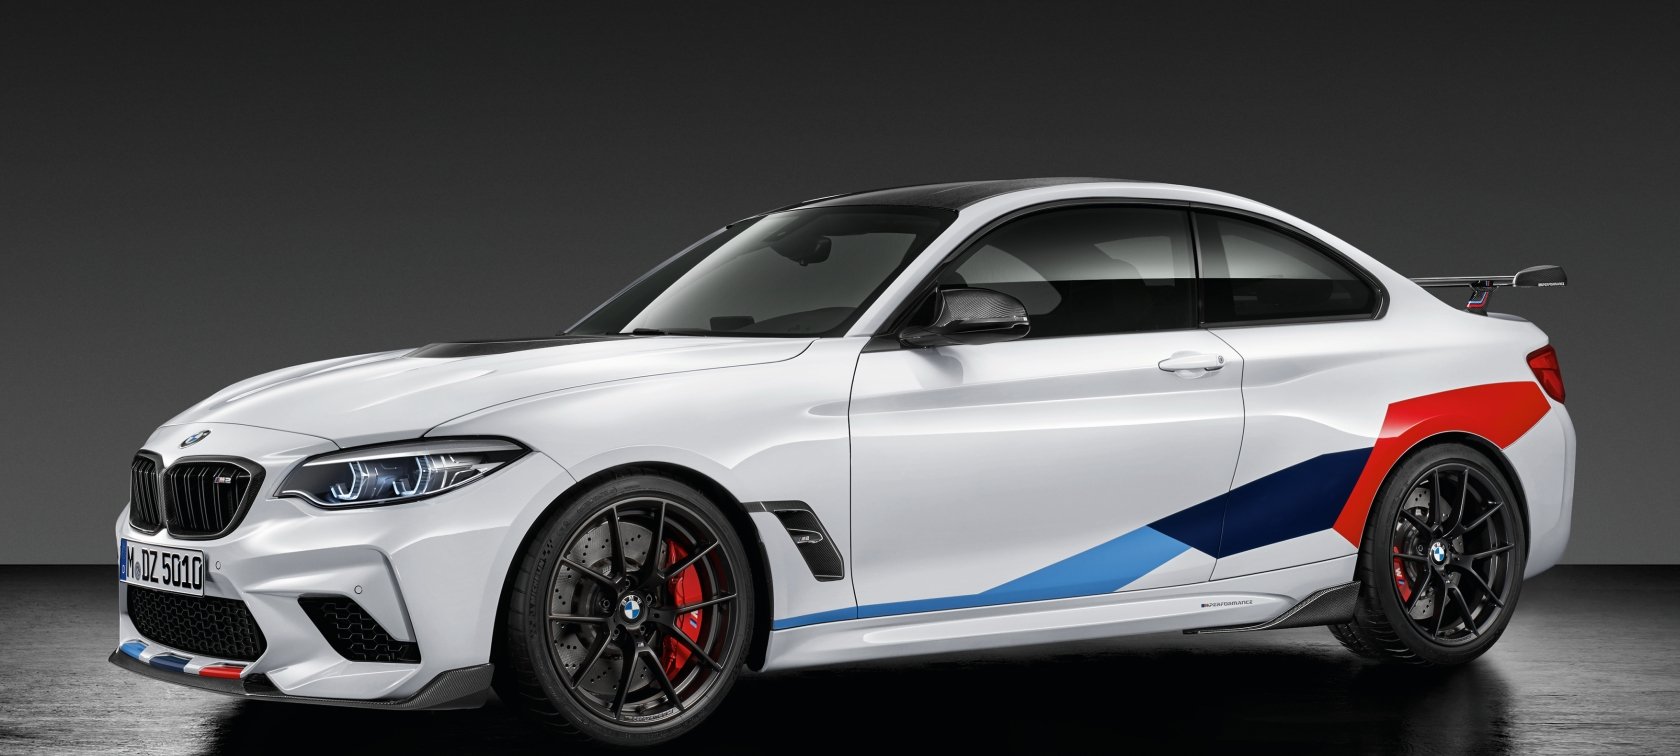 BMW M2 – Unleash an M-powered coupe